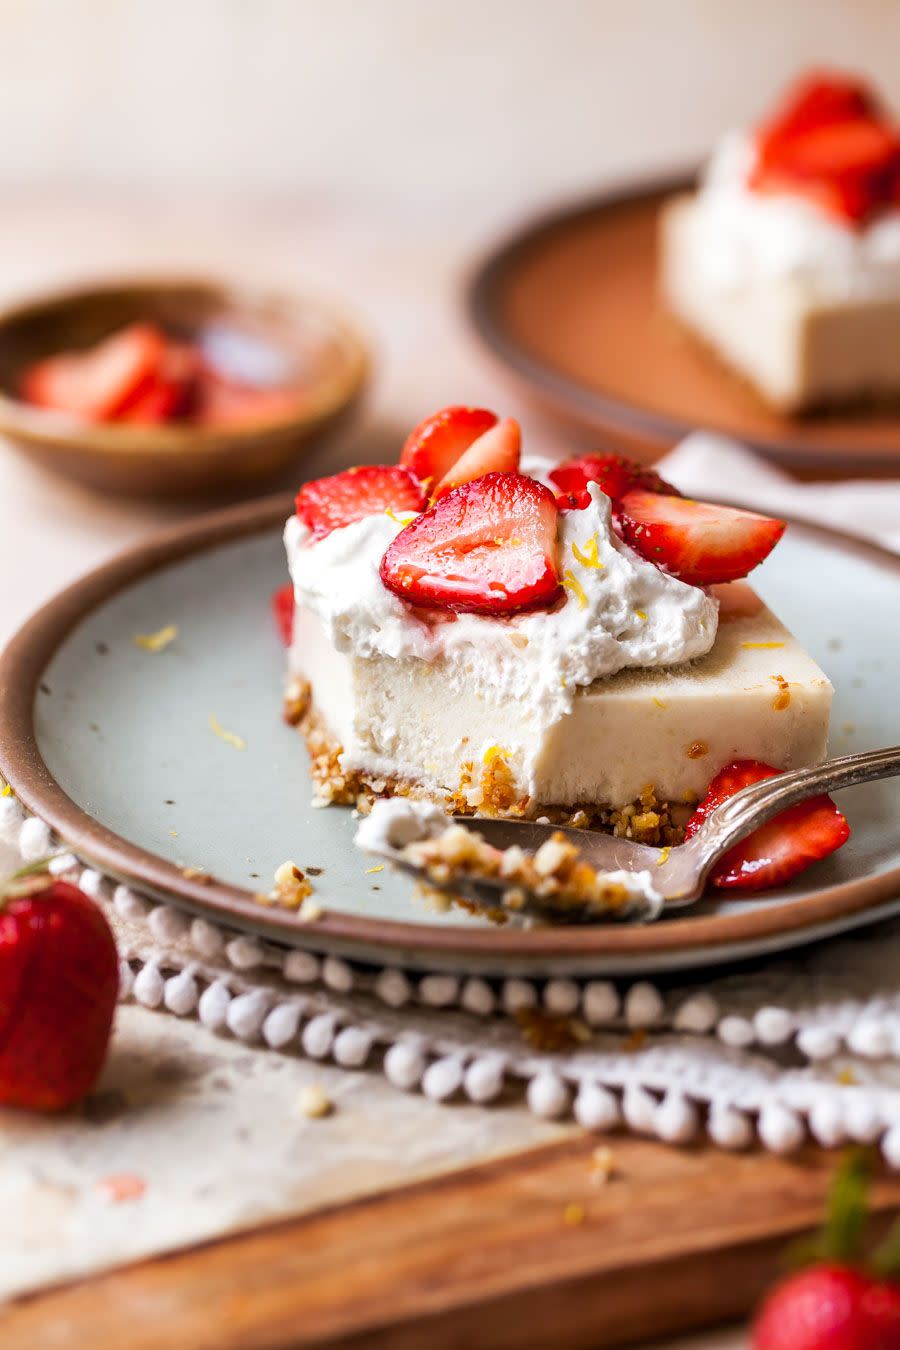 25 Easy Desserts So Delicious You'll Forget They're Vegan